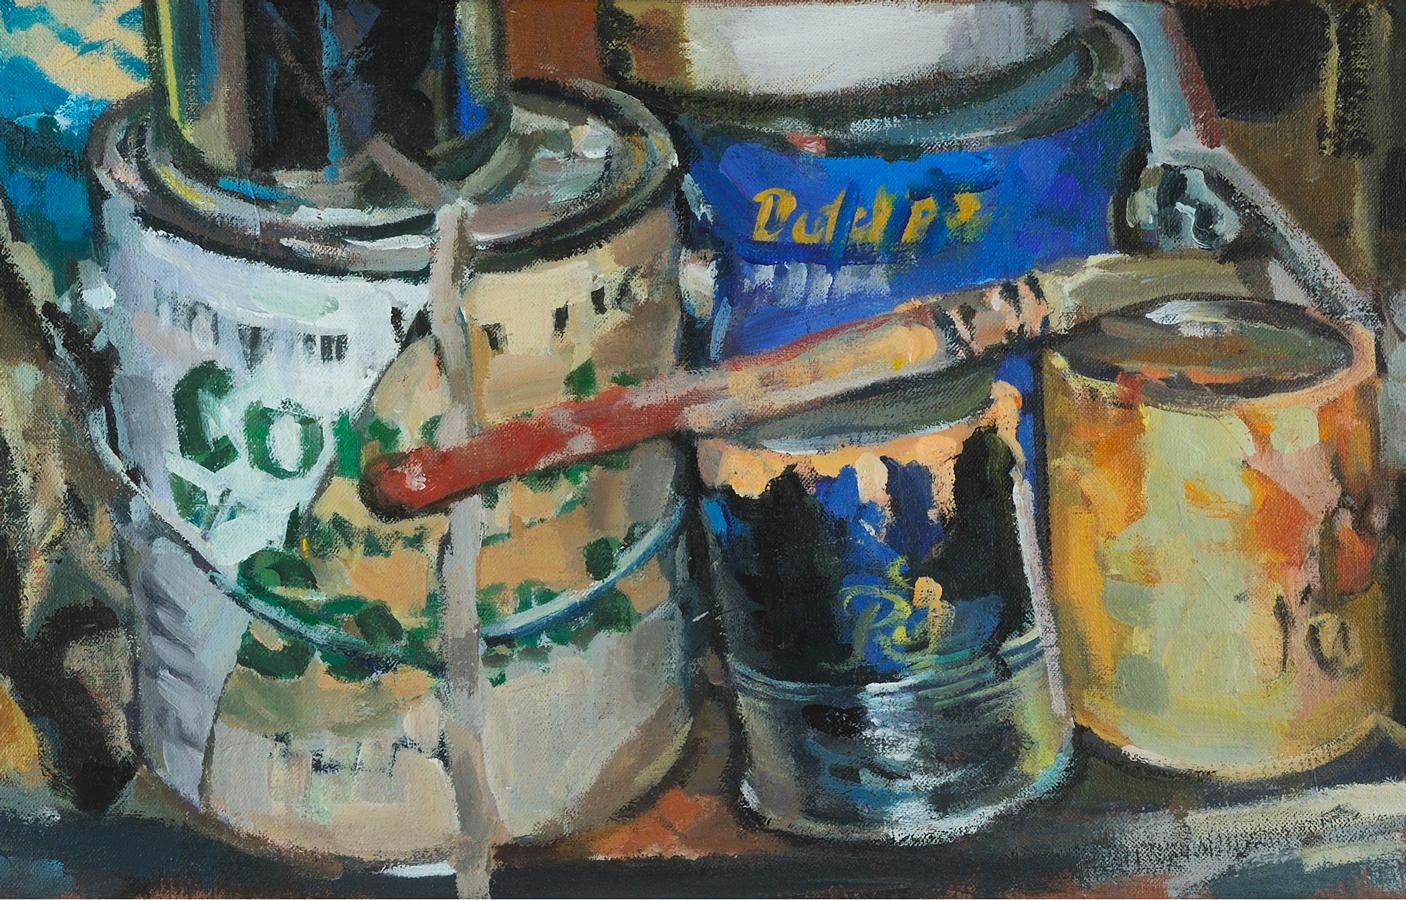 Paint Cans Chartreuse, acrylic on canvas, 18 1/4" x 24 1/4", 2010